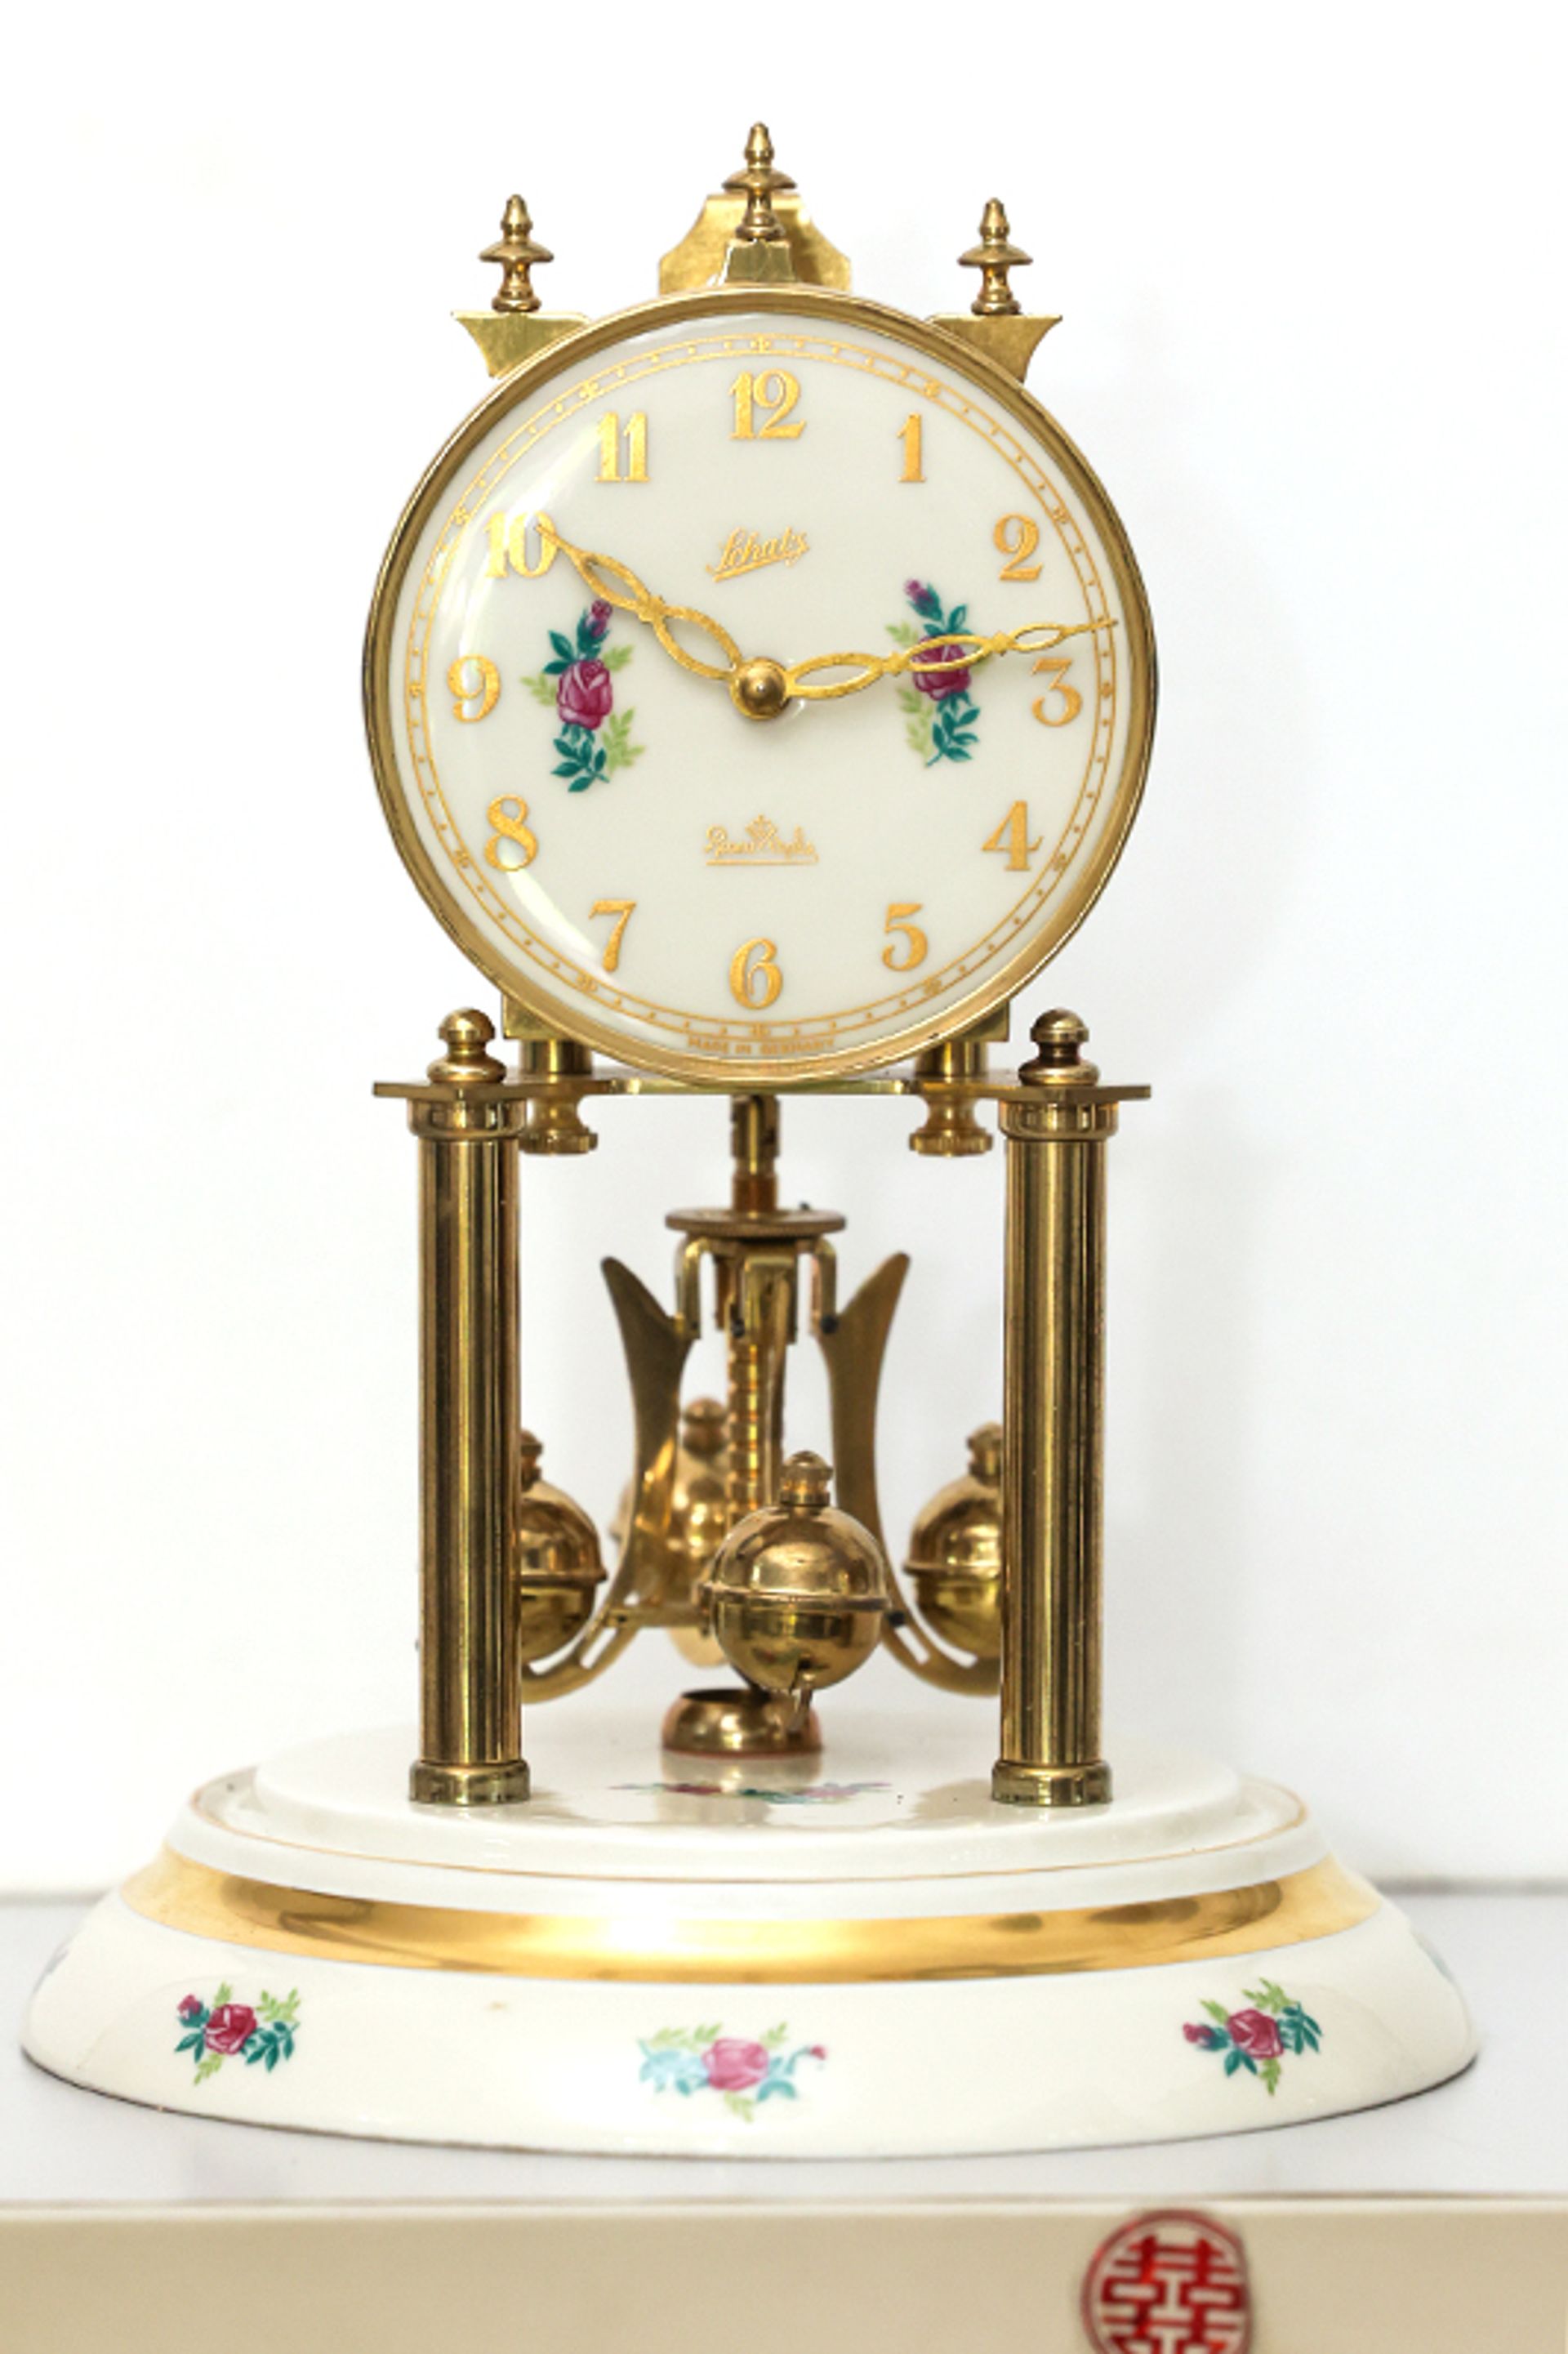 A 400-day clock made by Aug. Schatz & Sohne, a German maker, in 1954. Schatz had commissioned Rosenthal, the well-known German high-quality porcelain and glassmaker, to custom-make the porcelain dial as well as porcelain base for their clocks.